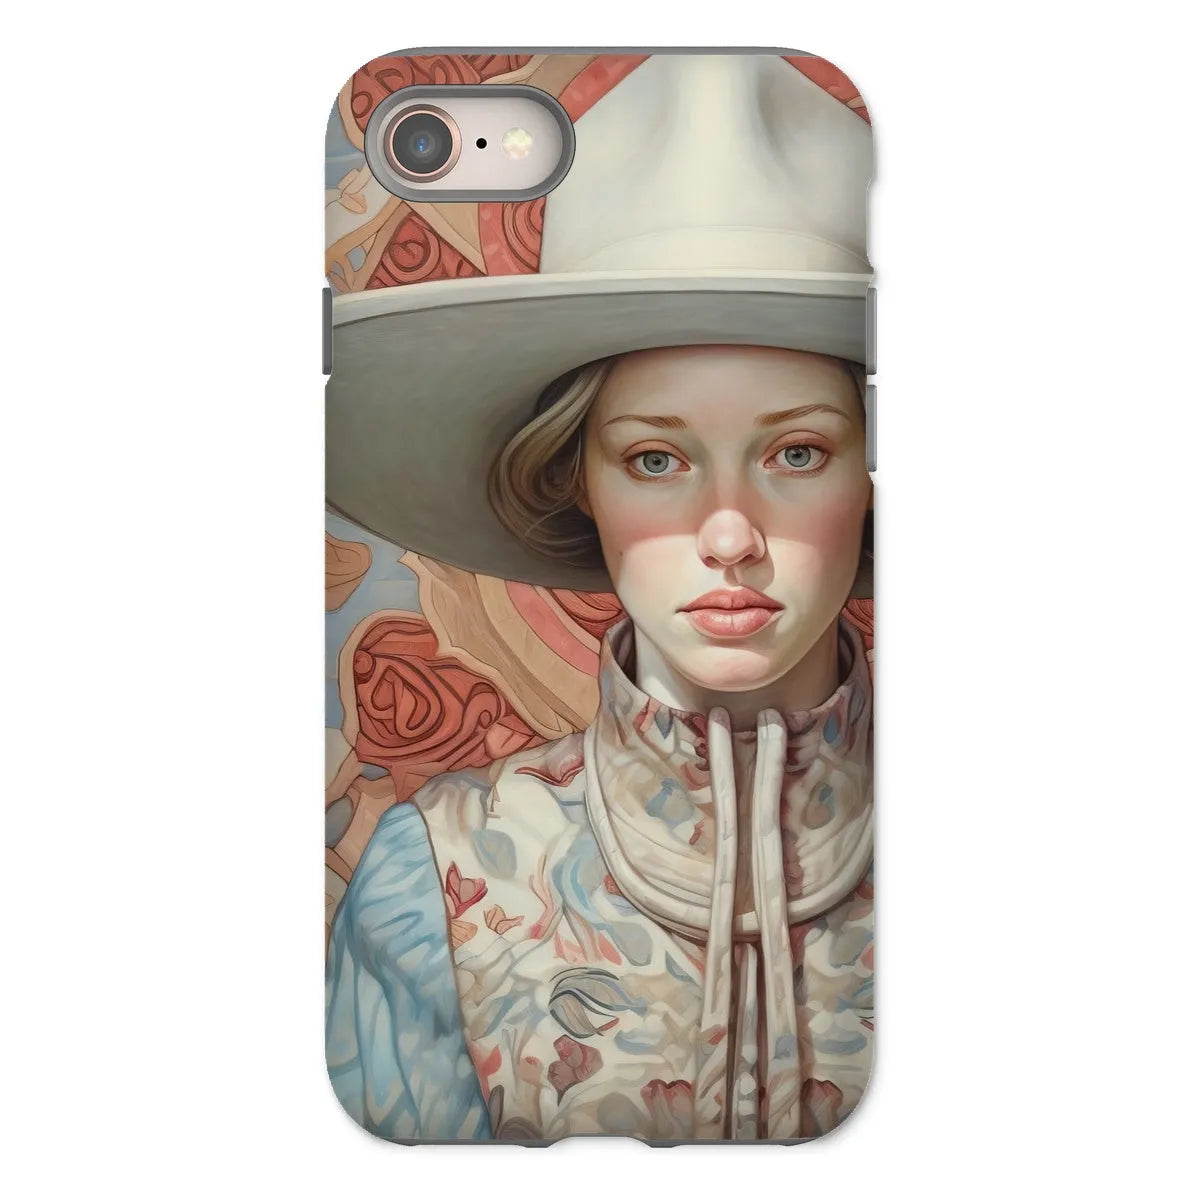 Lottie The Lesbian Cowgirl - Sapphic Art Phone Case - Iphone 8 / Matte - Mobile Phone Cases - Aesthetic Art